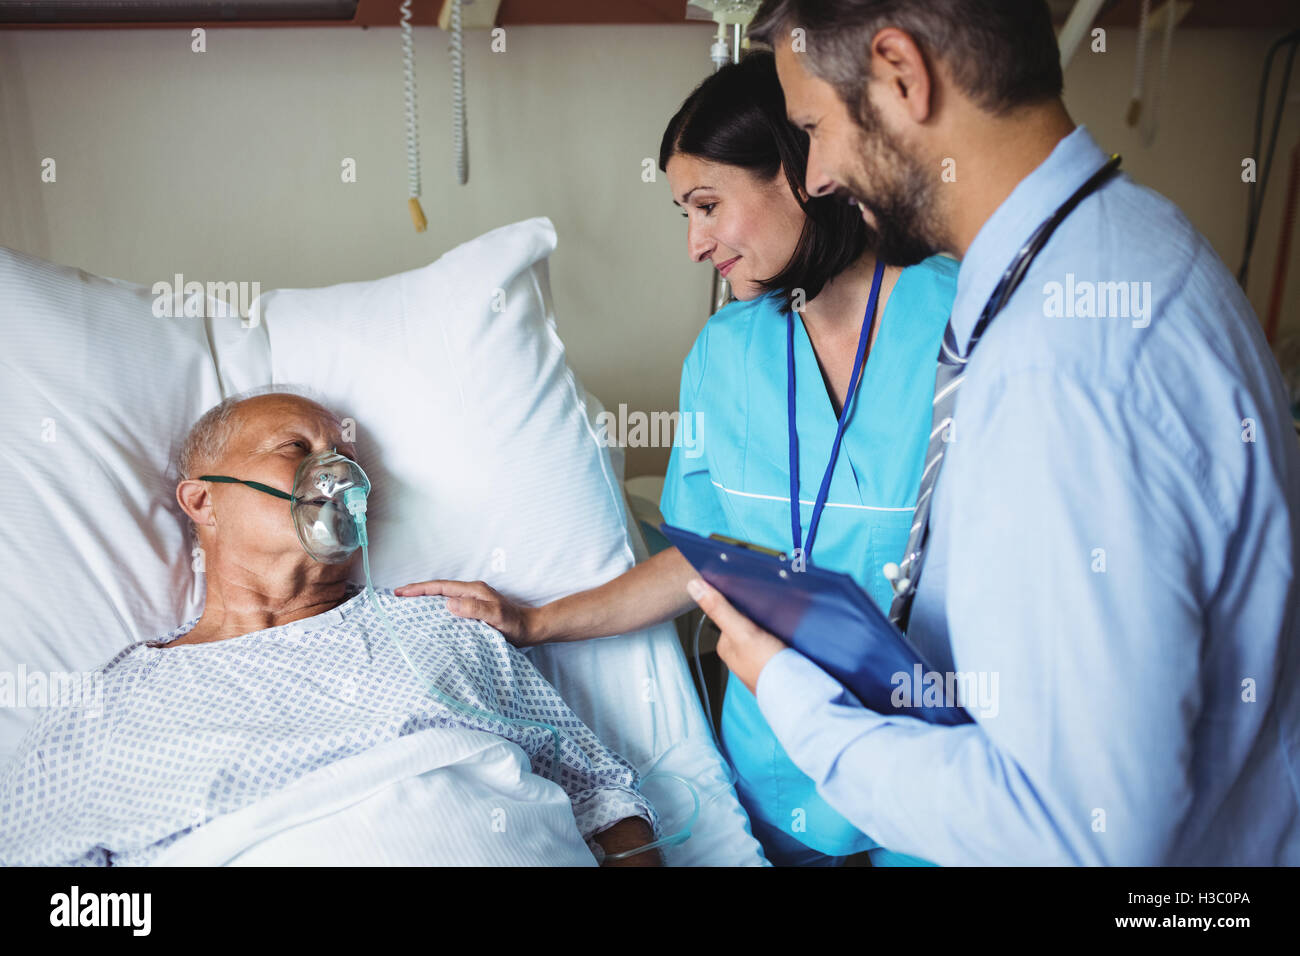 Nurse consoling senior patient with doctor Stock Photo